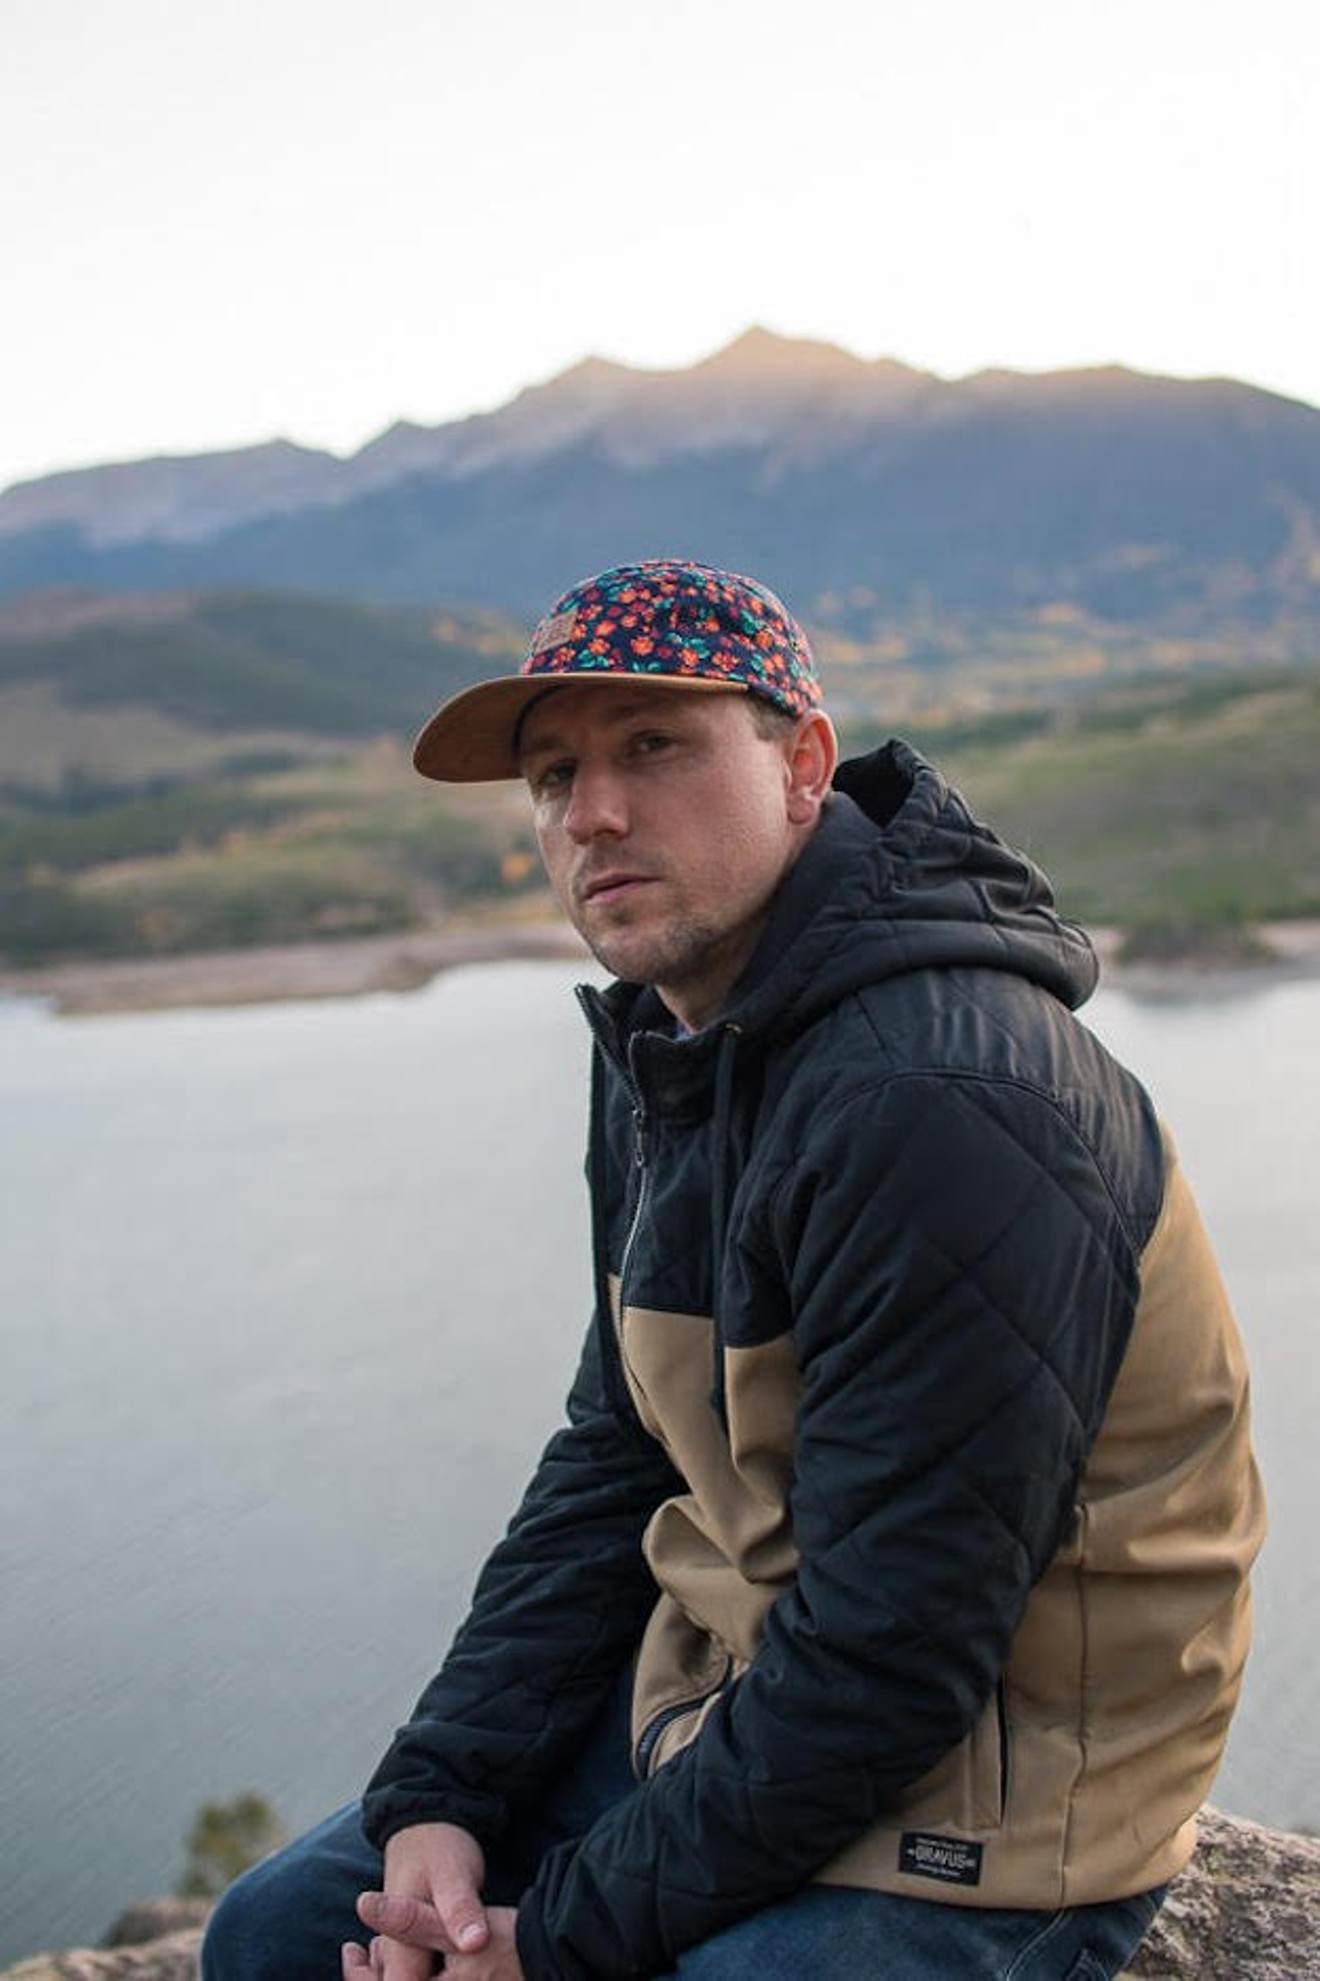 Denver rapper AG FLUX will have his album-release show at the Bear Creek Distillery.